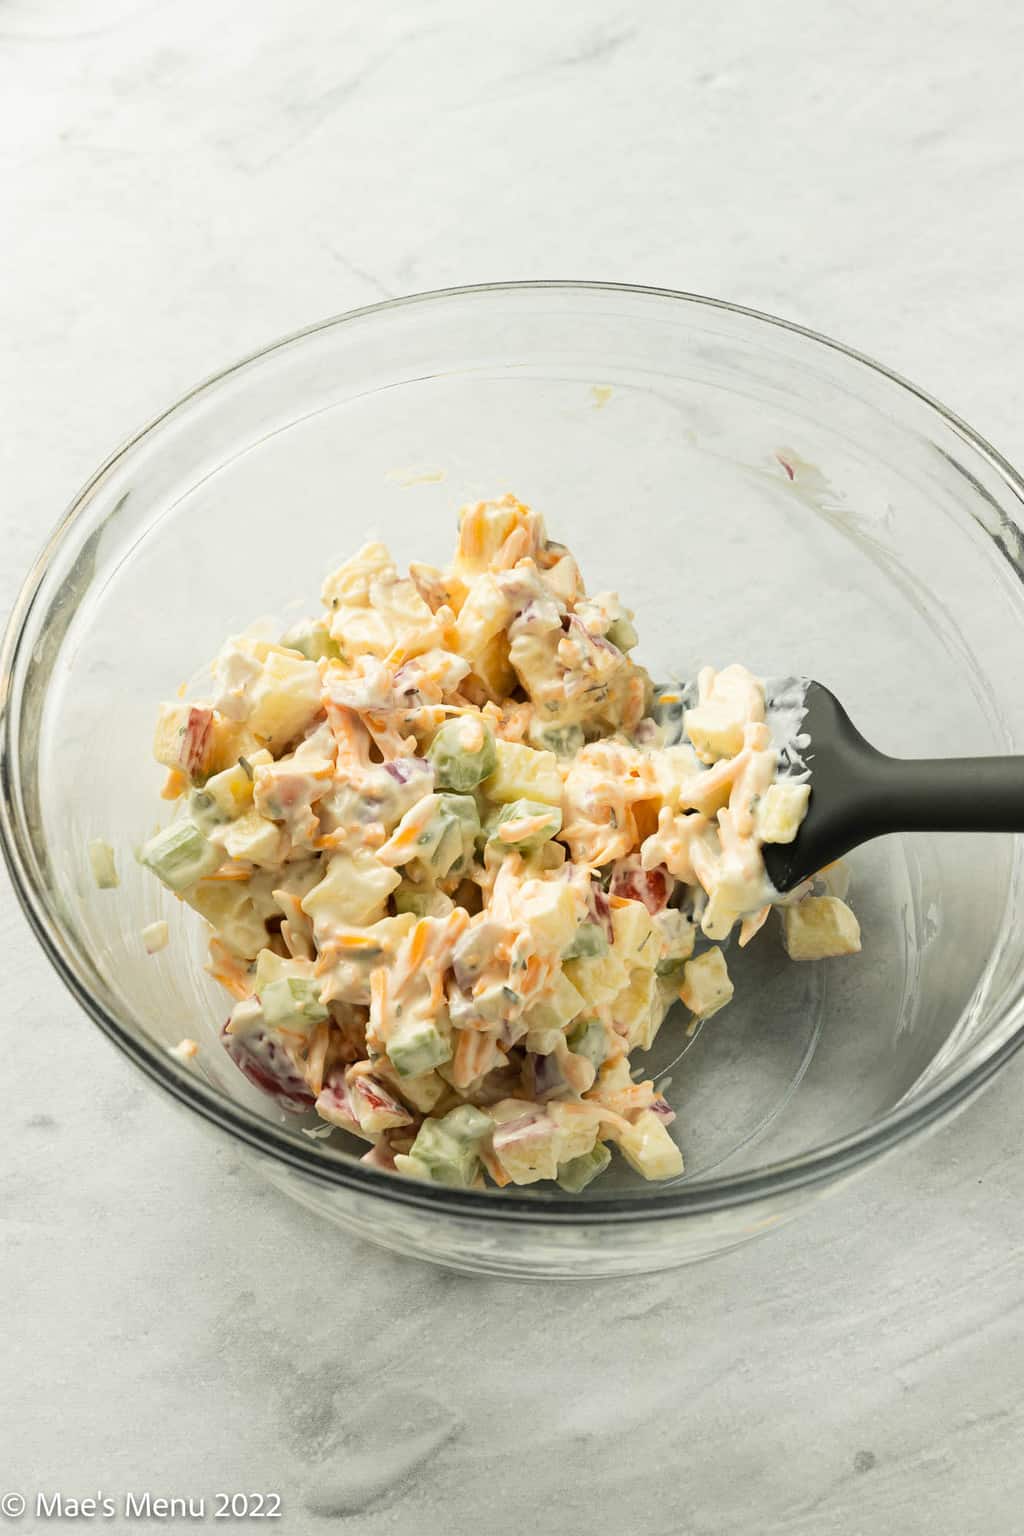 A glass mixing bowl with chicken, celery, and apples tossed in the dressing.